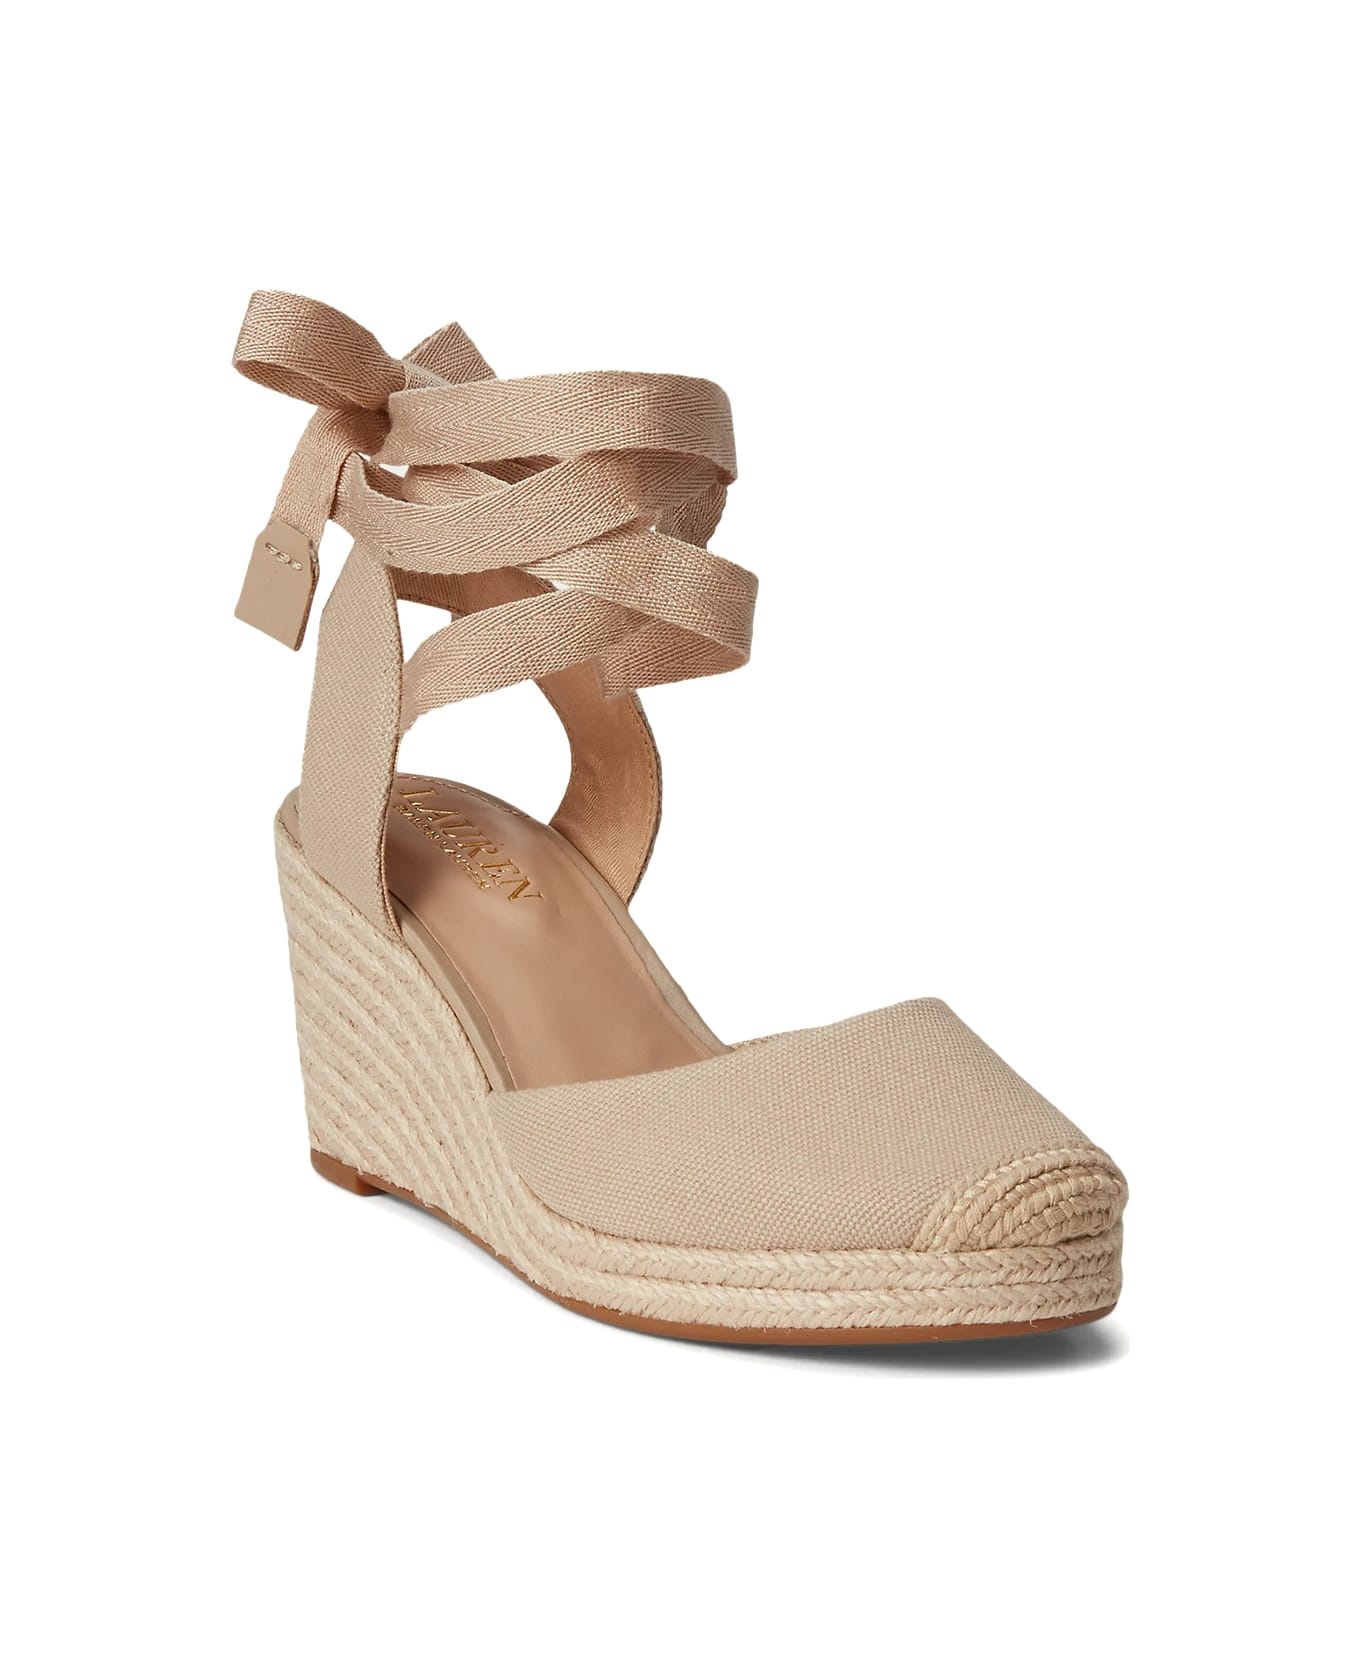 Beige Espadrilles With Ankle Laces - 2